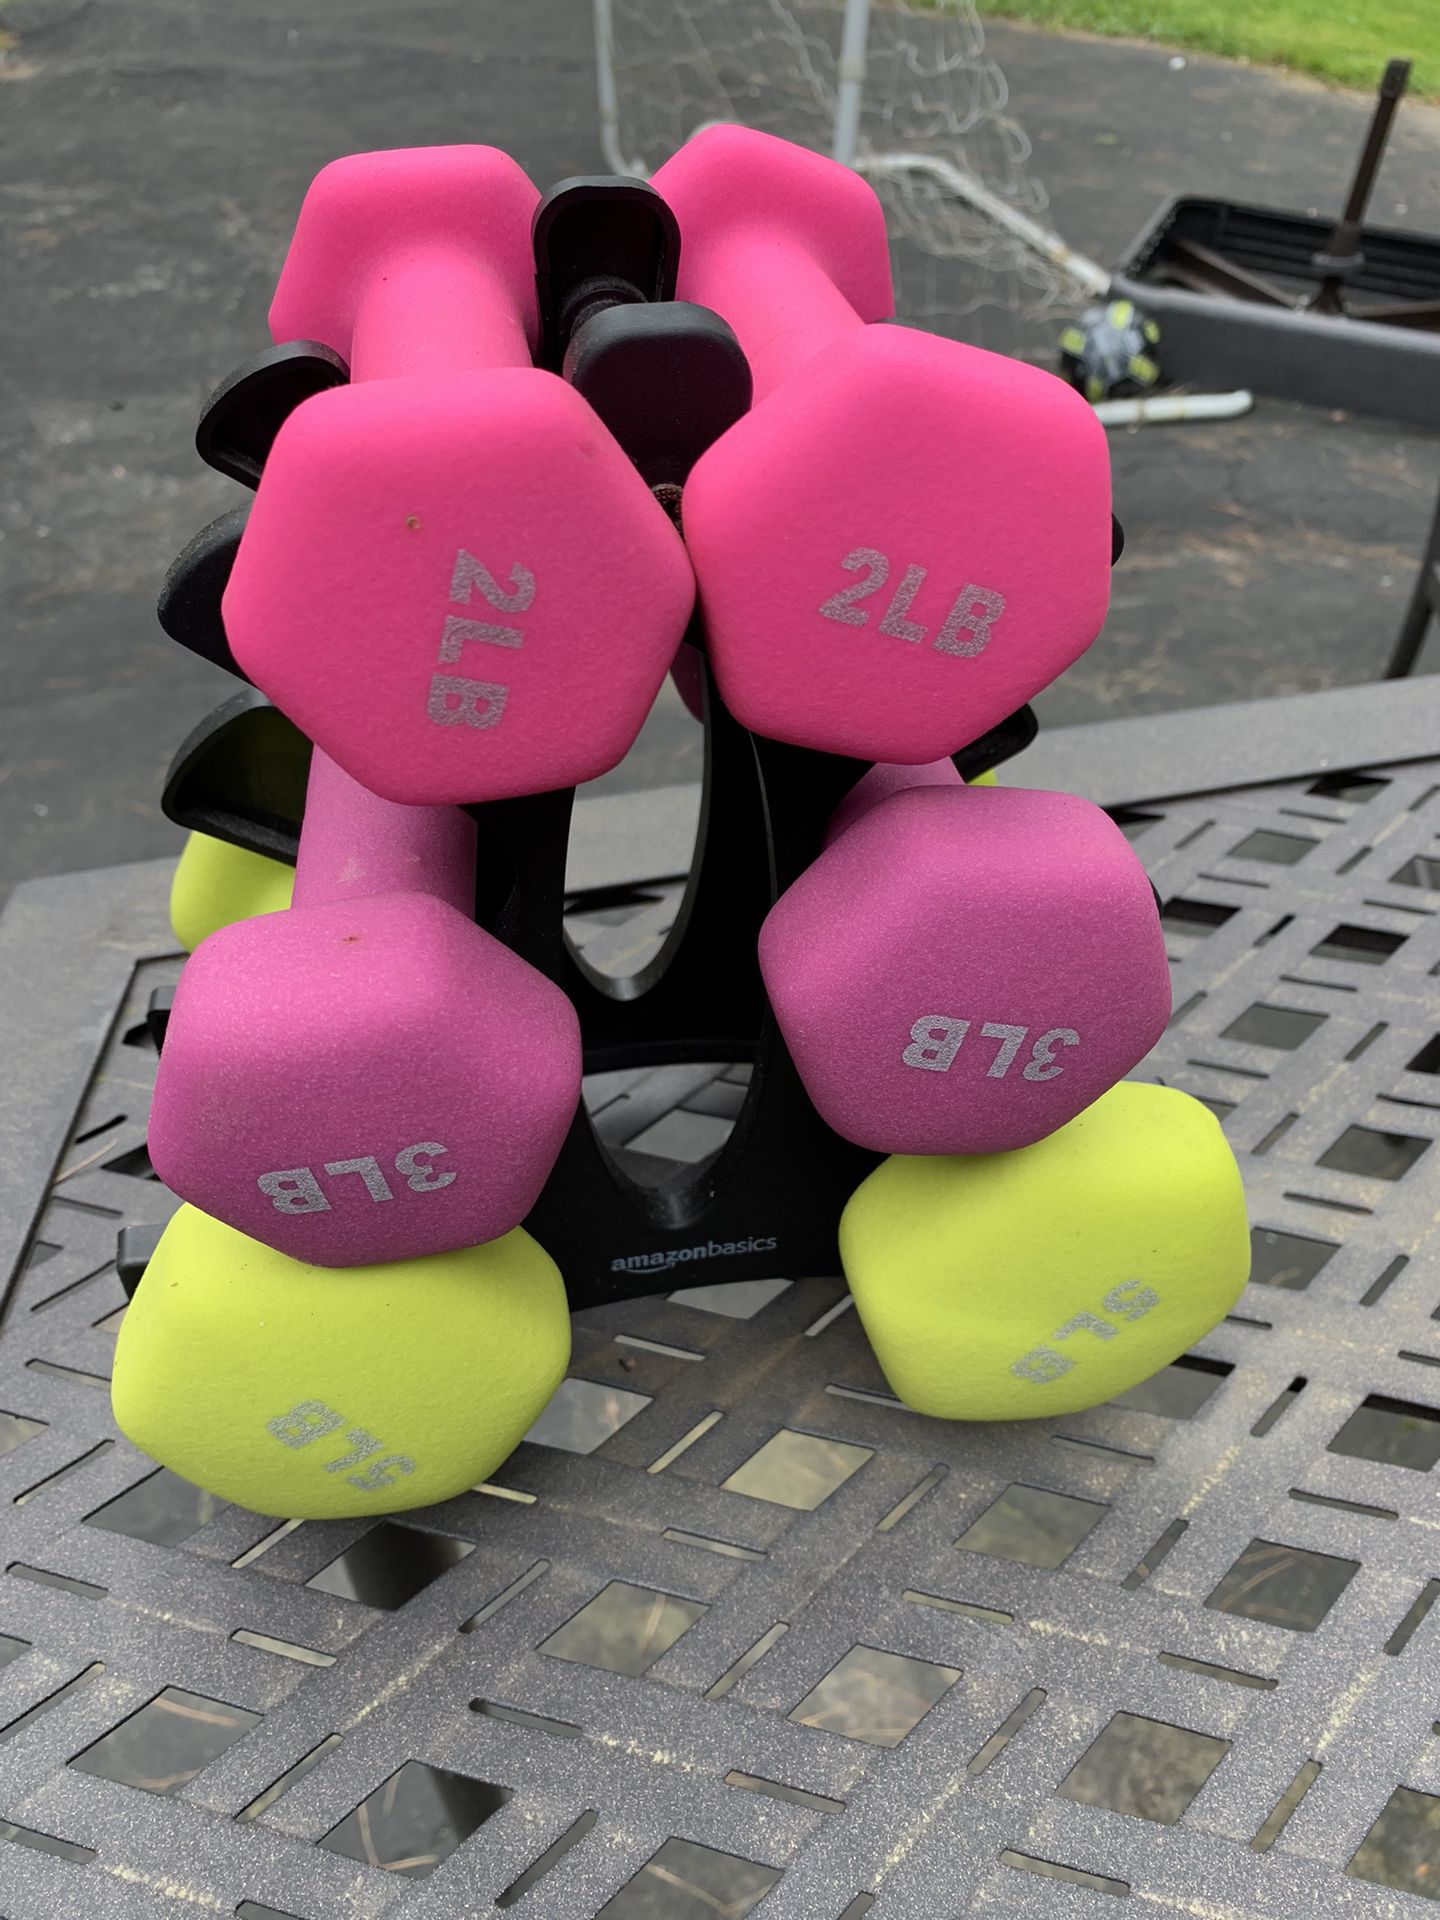 Weights 2,3 And 5 Lb Dumbells With Stand